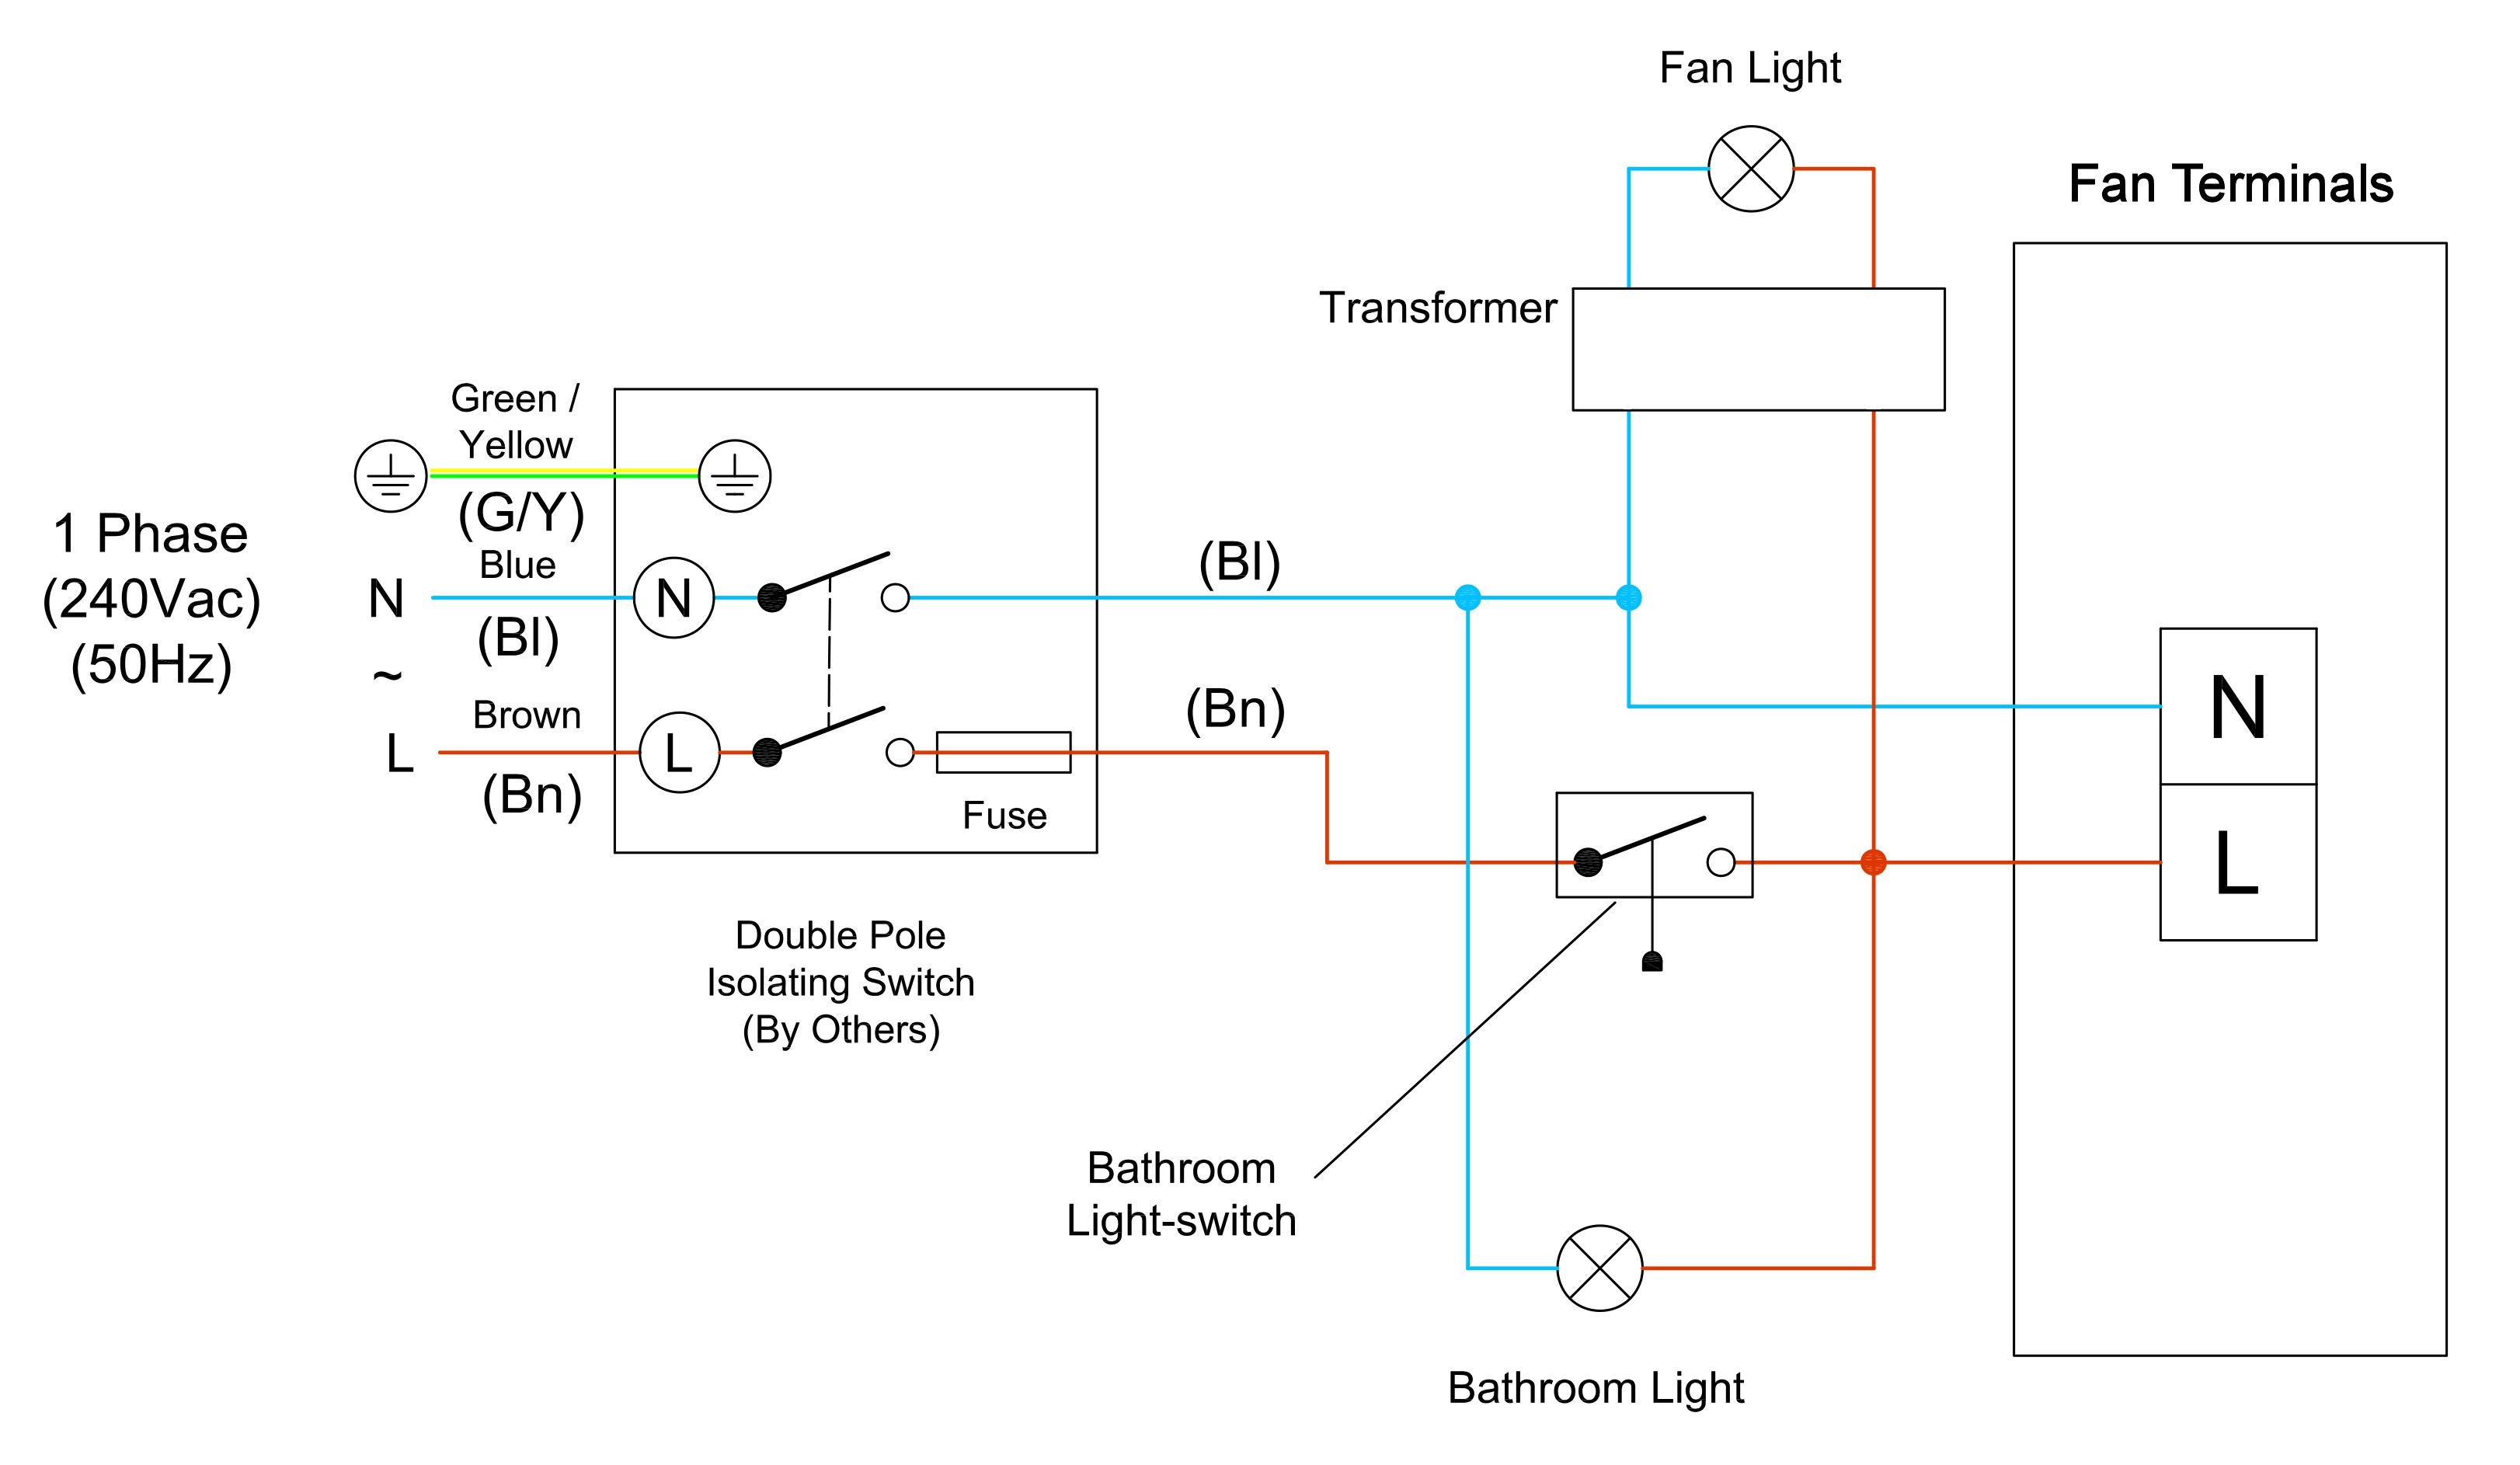 How to Wire Recessed Lighting Diagram Best Wiring A Bathroom Fan and Light Lighting Diagram Installing Heater